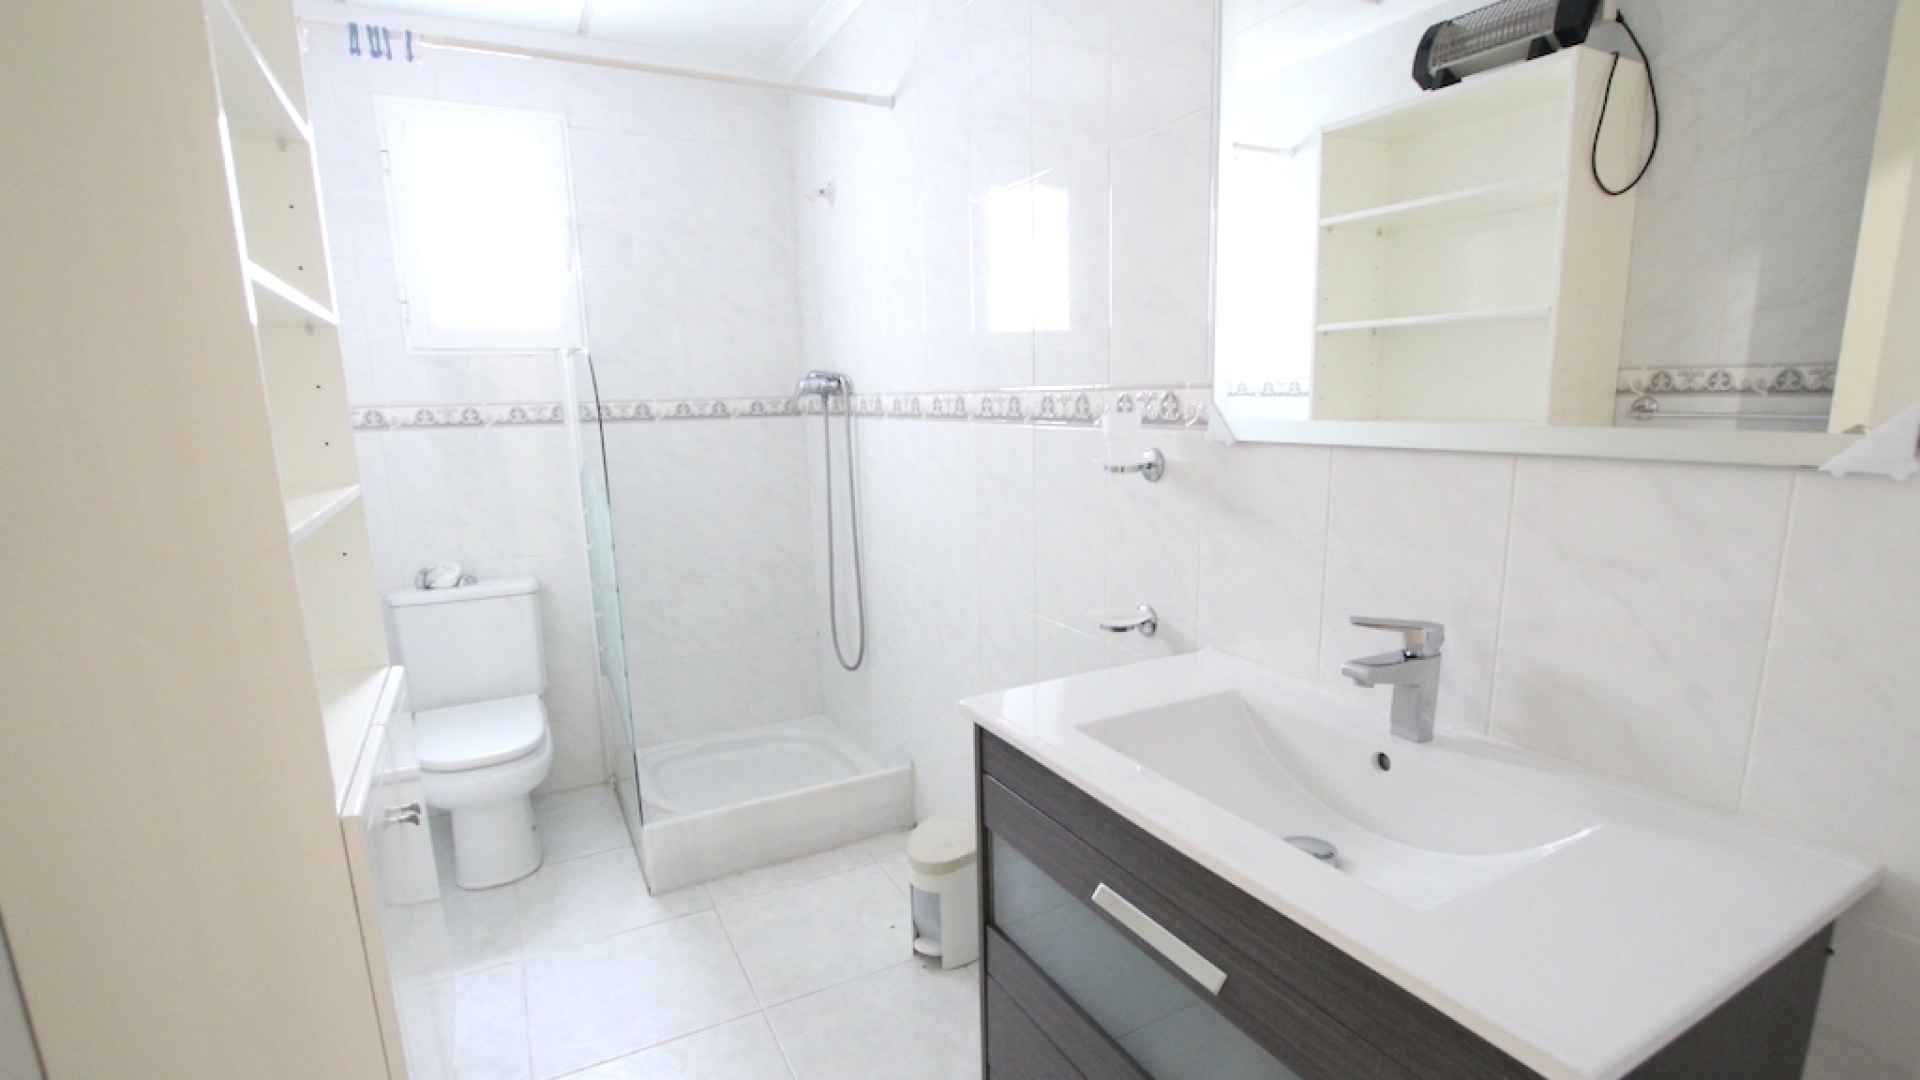 48172_exceptionally_spacious_3_bed_apartment_with_stunning_views_070823130834_img_7794